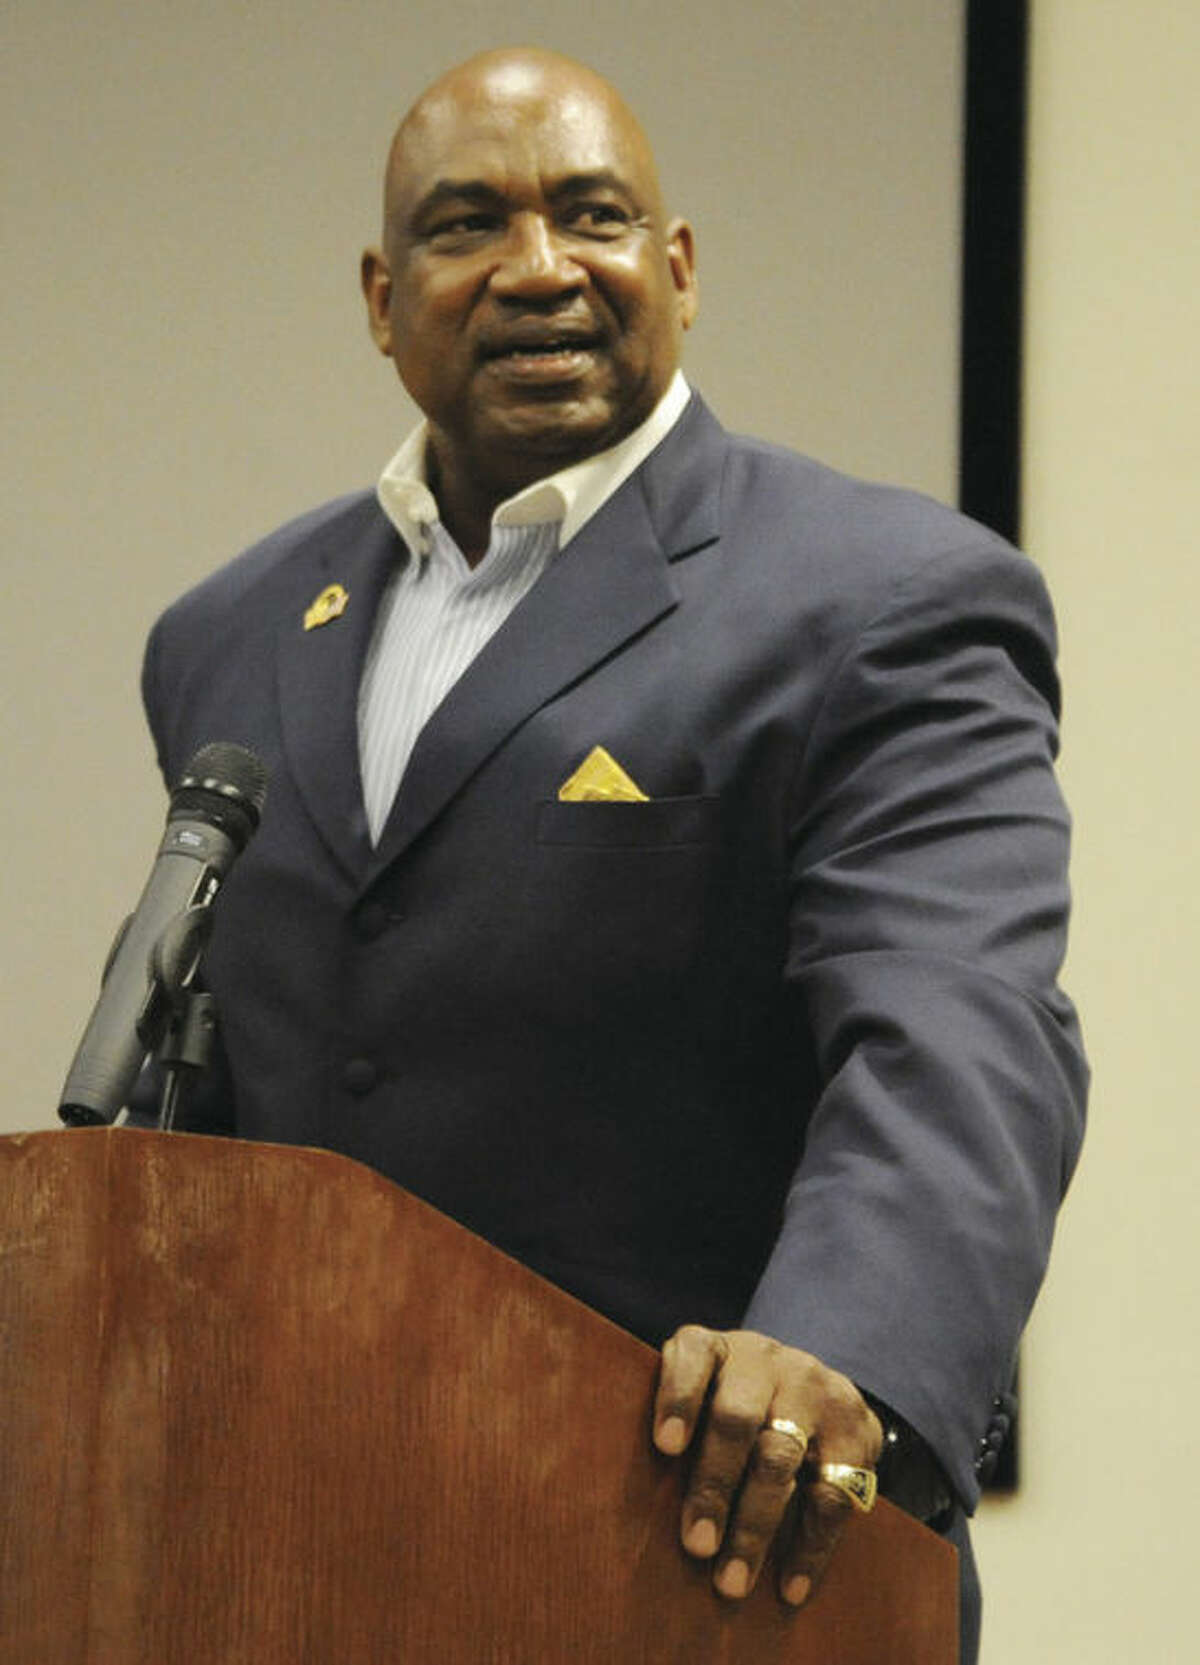 Hour photo/Matthew Vinci George Martin, a former defensive lineman for the New York Giants, addresses the crowd Tuesday night during his talk about civility on the gridiron at Stamford's Ferguson Library. Martin spent 14 years in the NFL, all with the Giants.